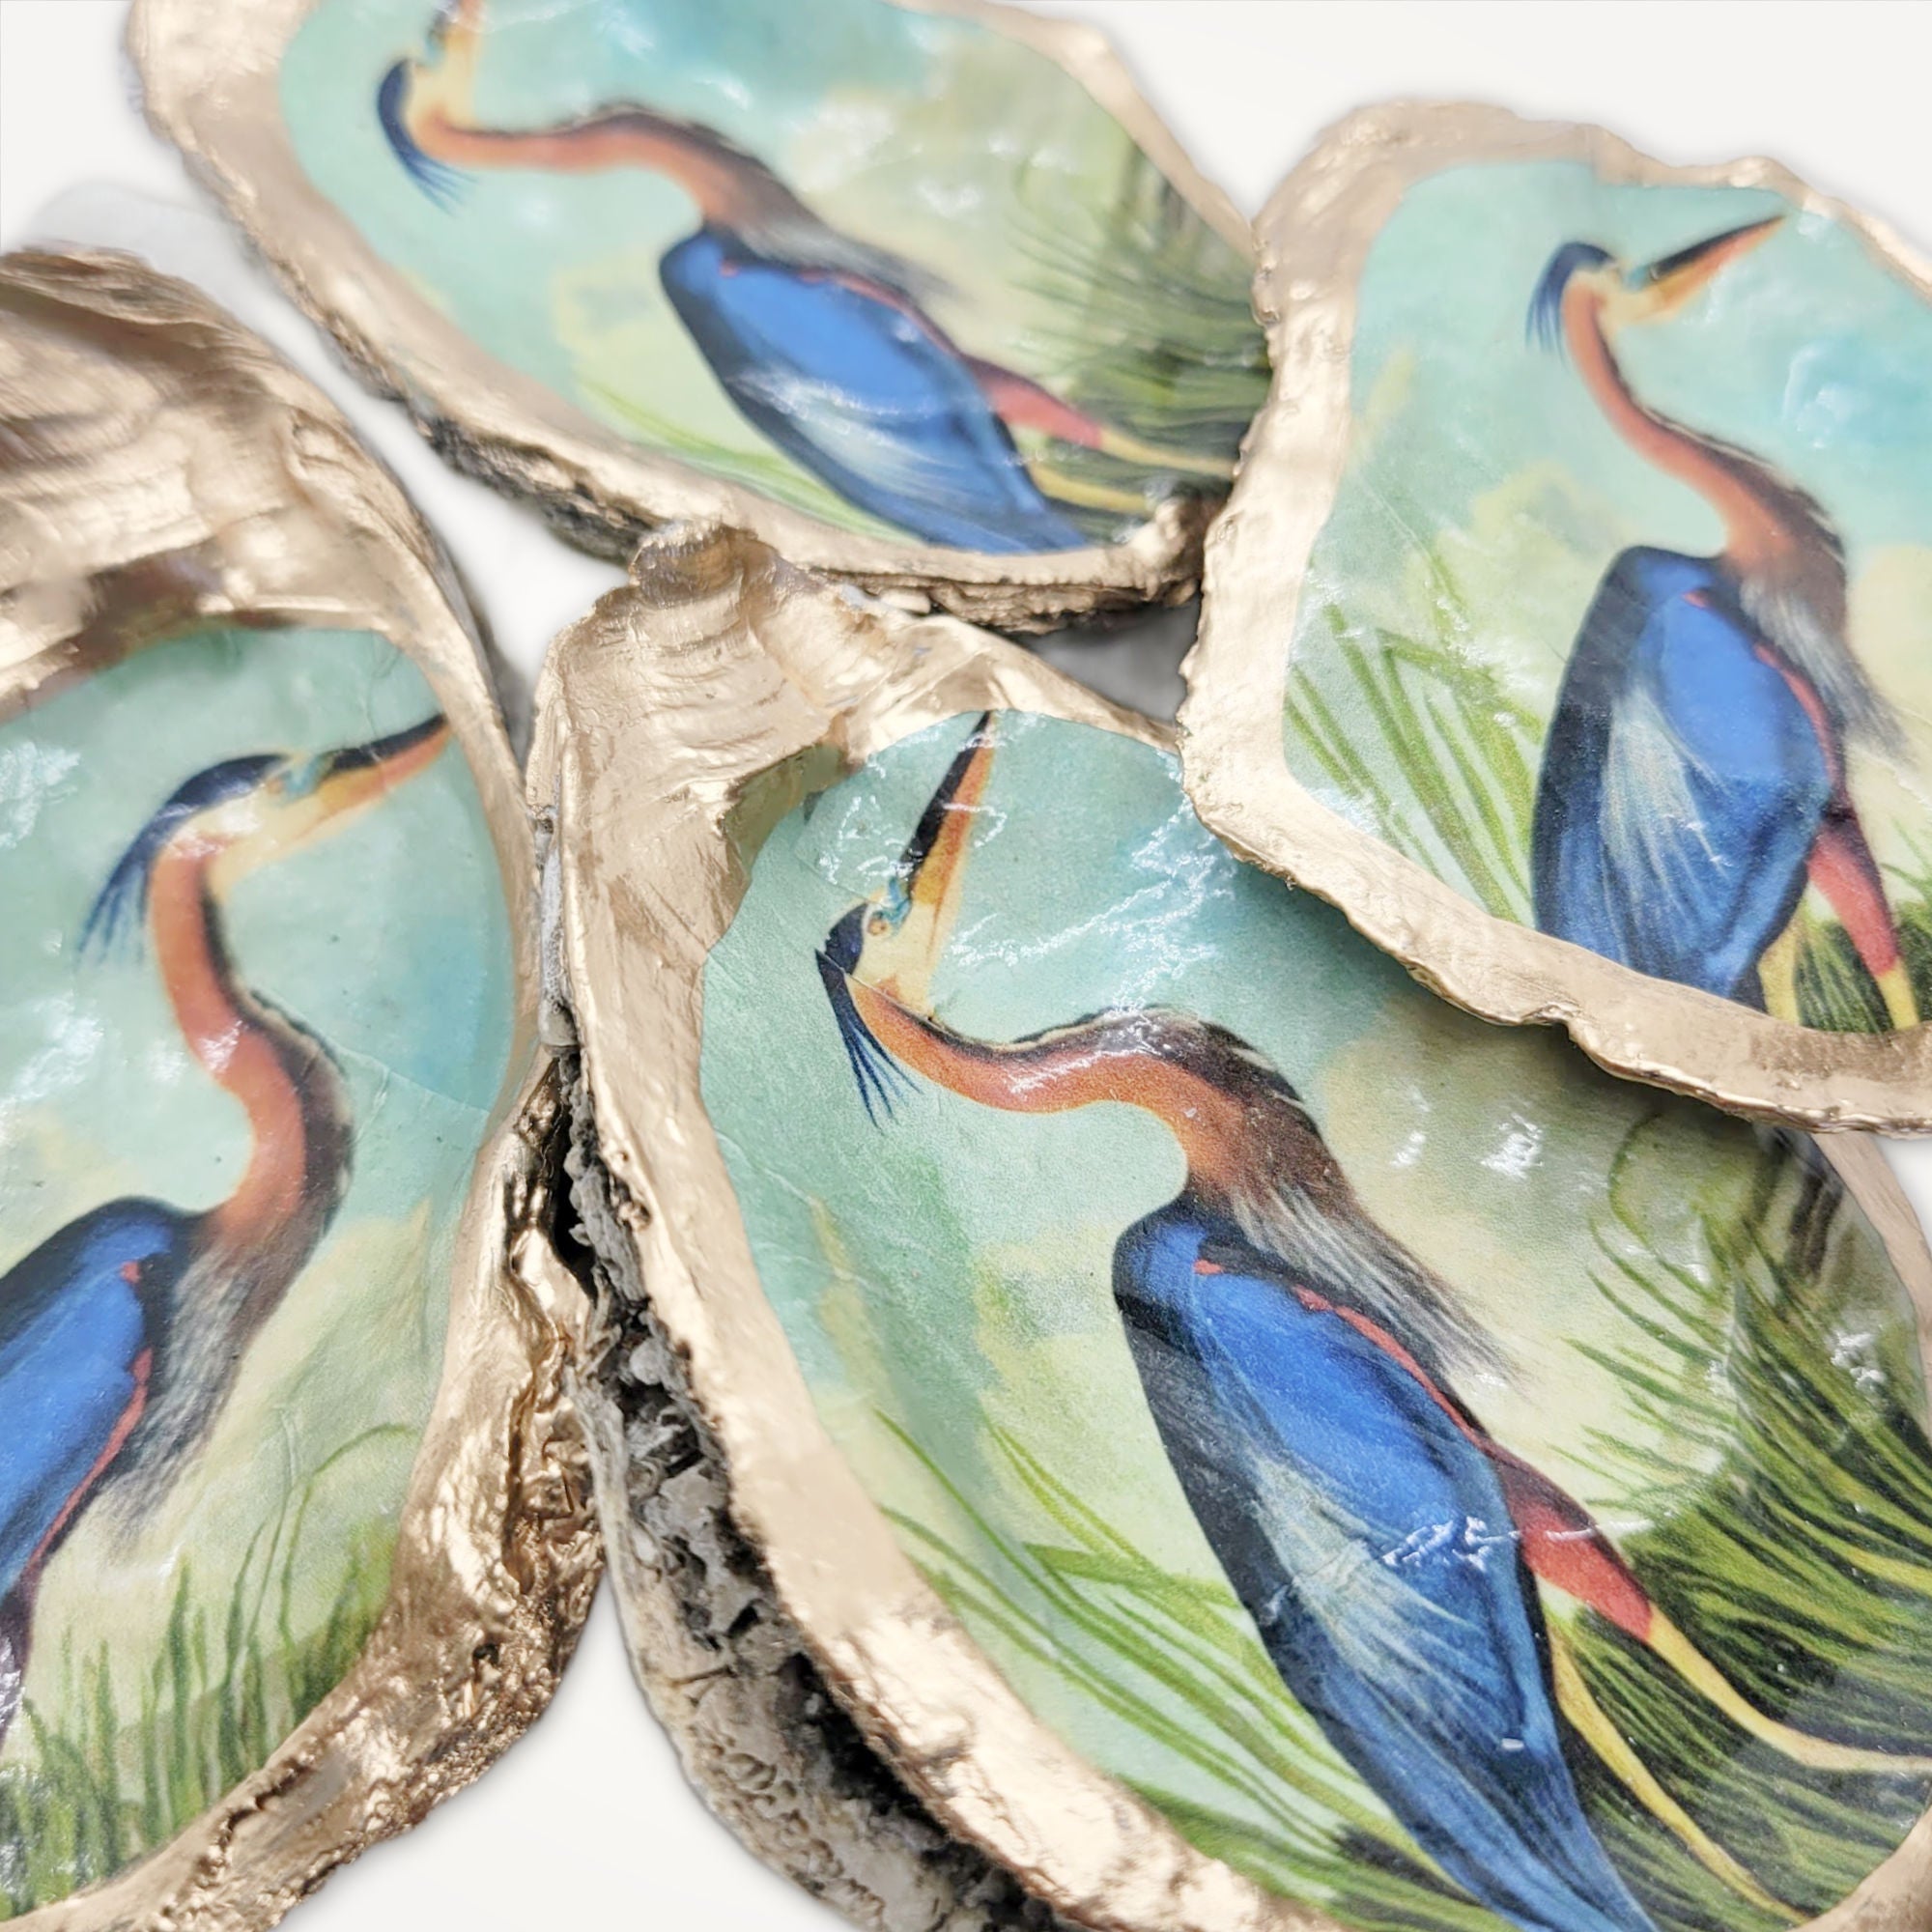 Blue Heron Ornament • Oyster Shell